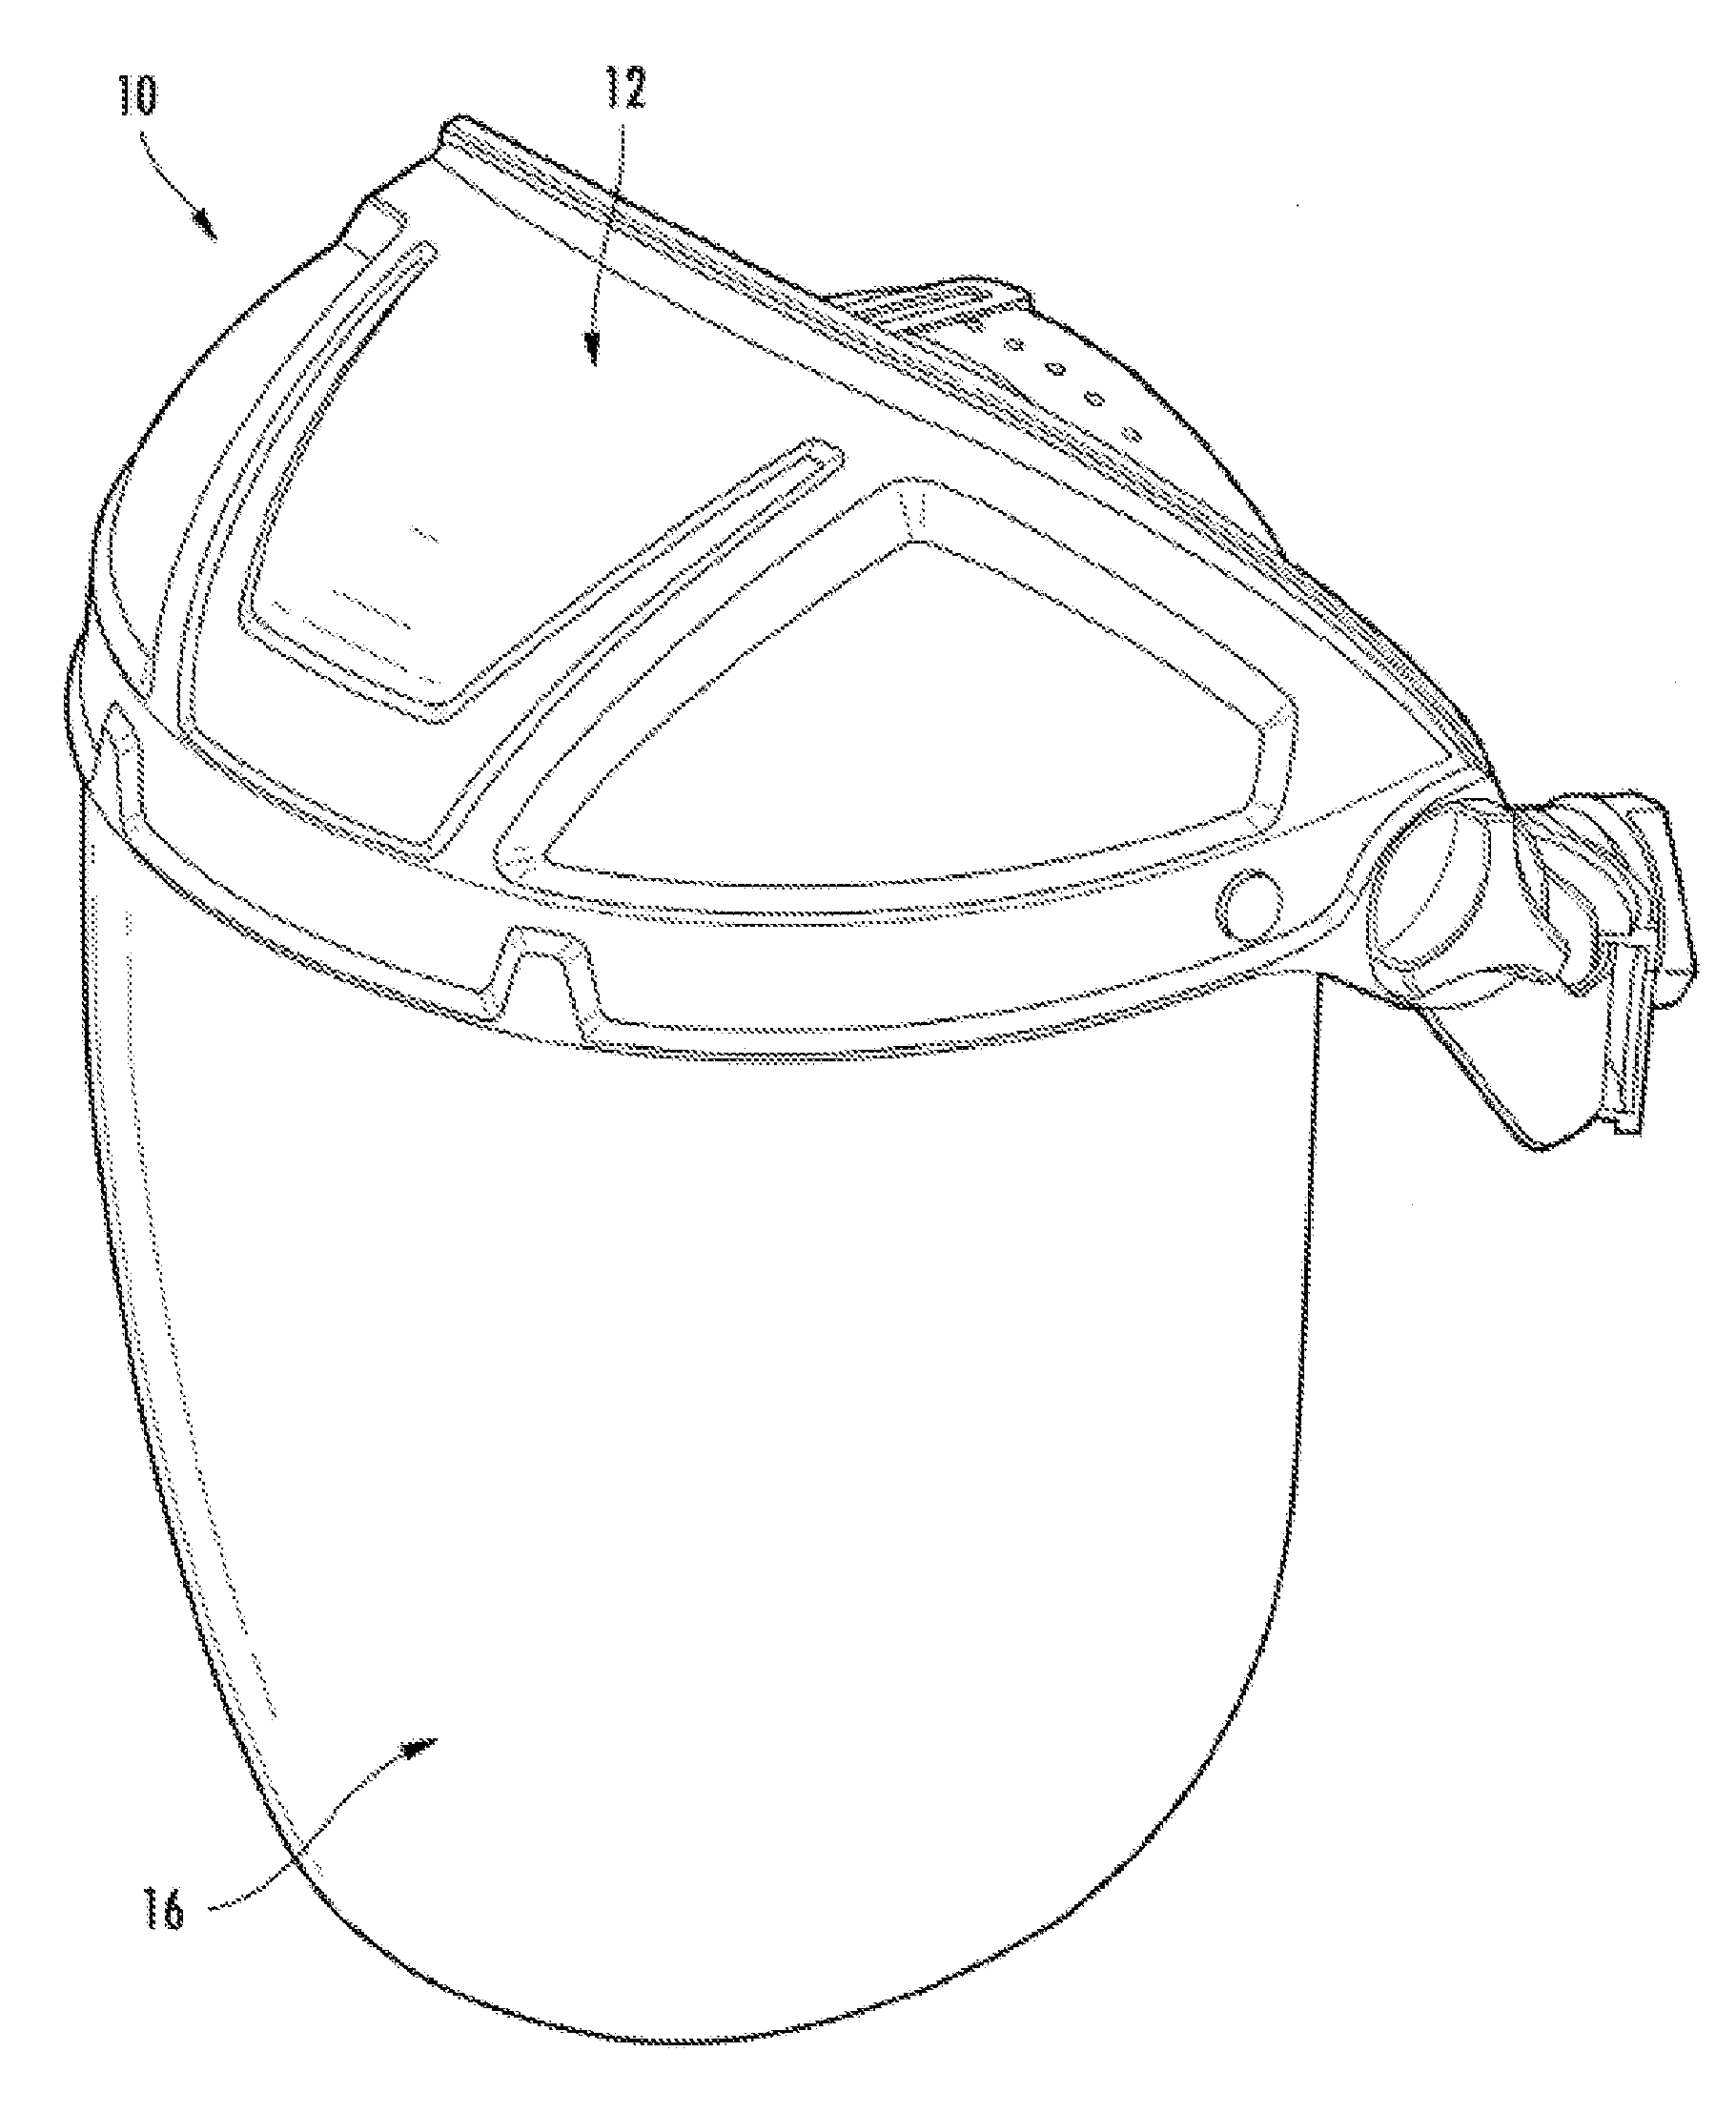 Electric-arc resistant face shield or lens including ir-blocking inorganic nanoparticles